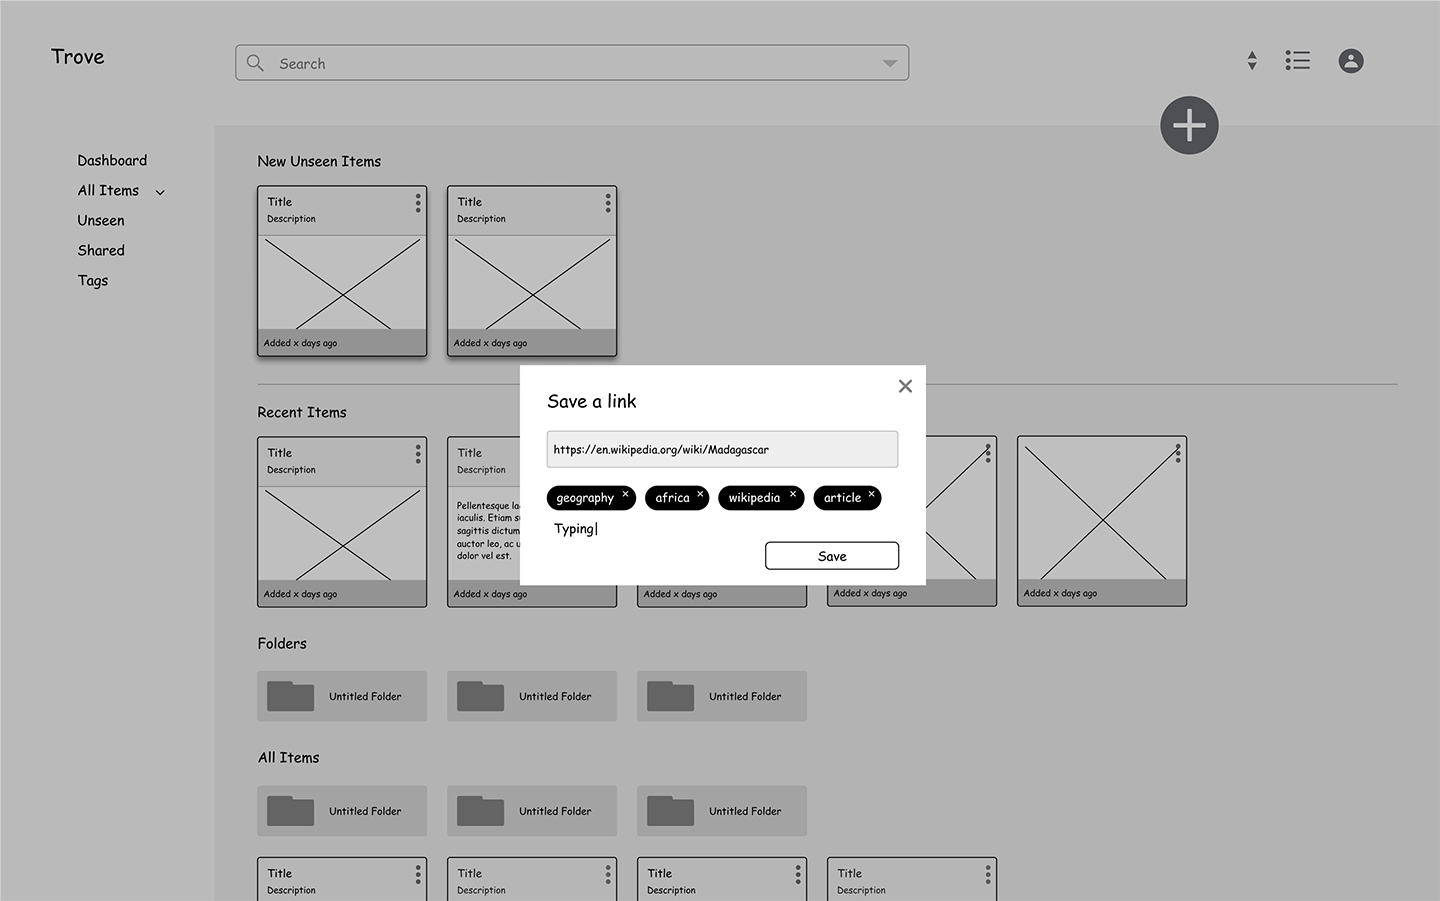 Low-fi Wireframes of saving a link